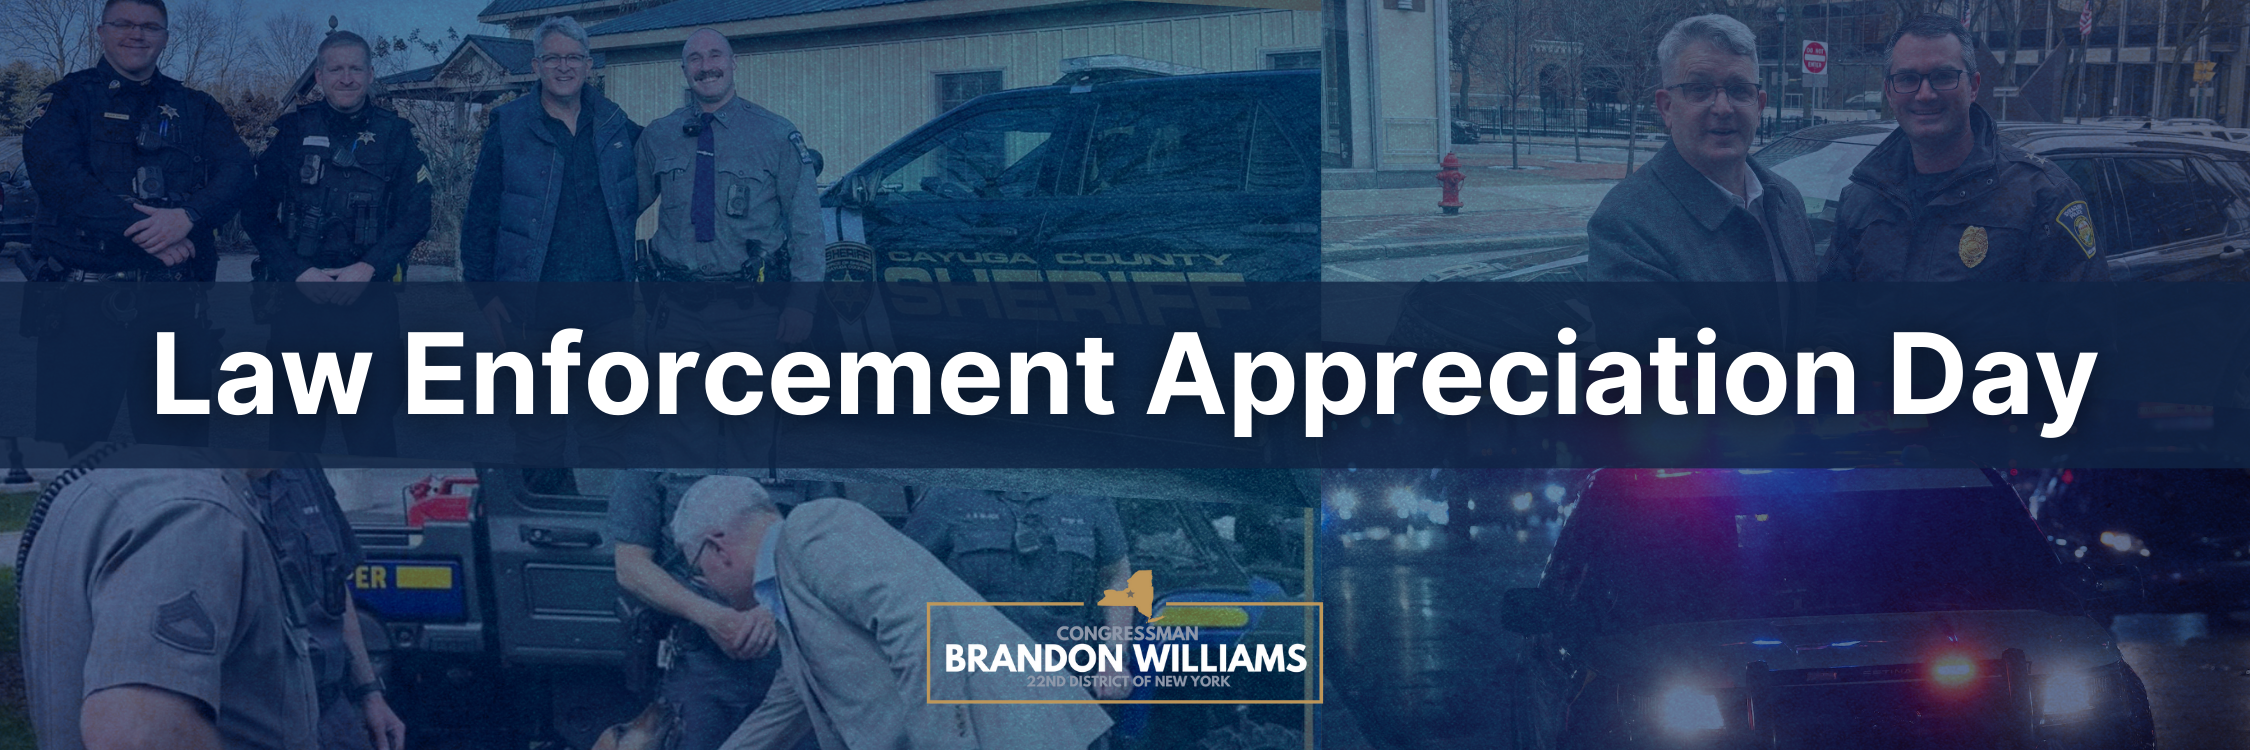 Rep. Williams on Law Enforcement Appreciation Day